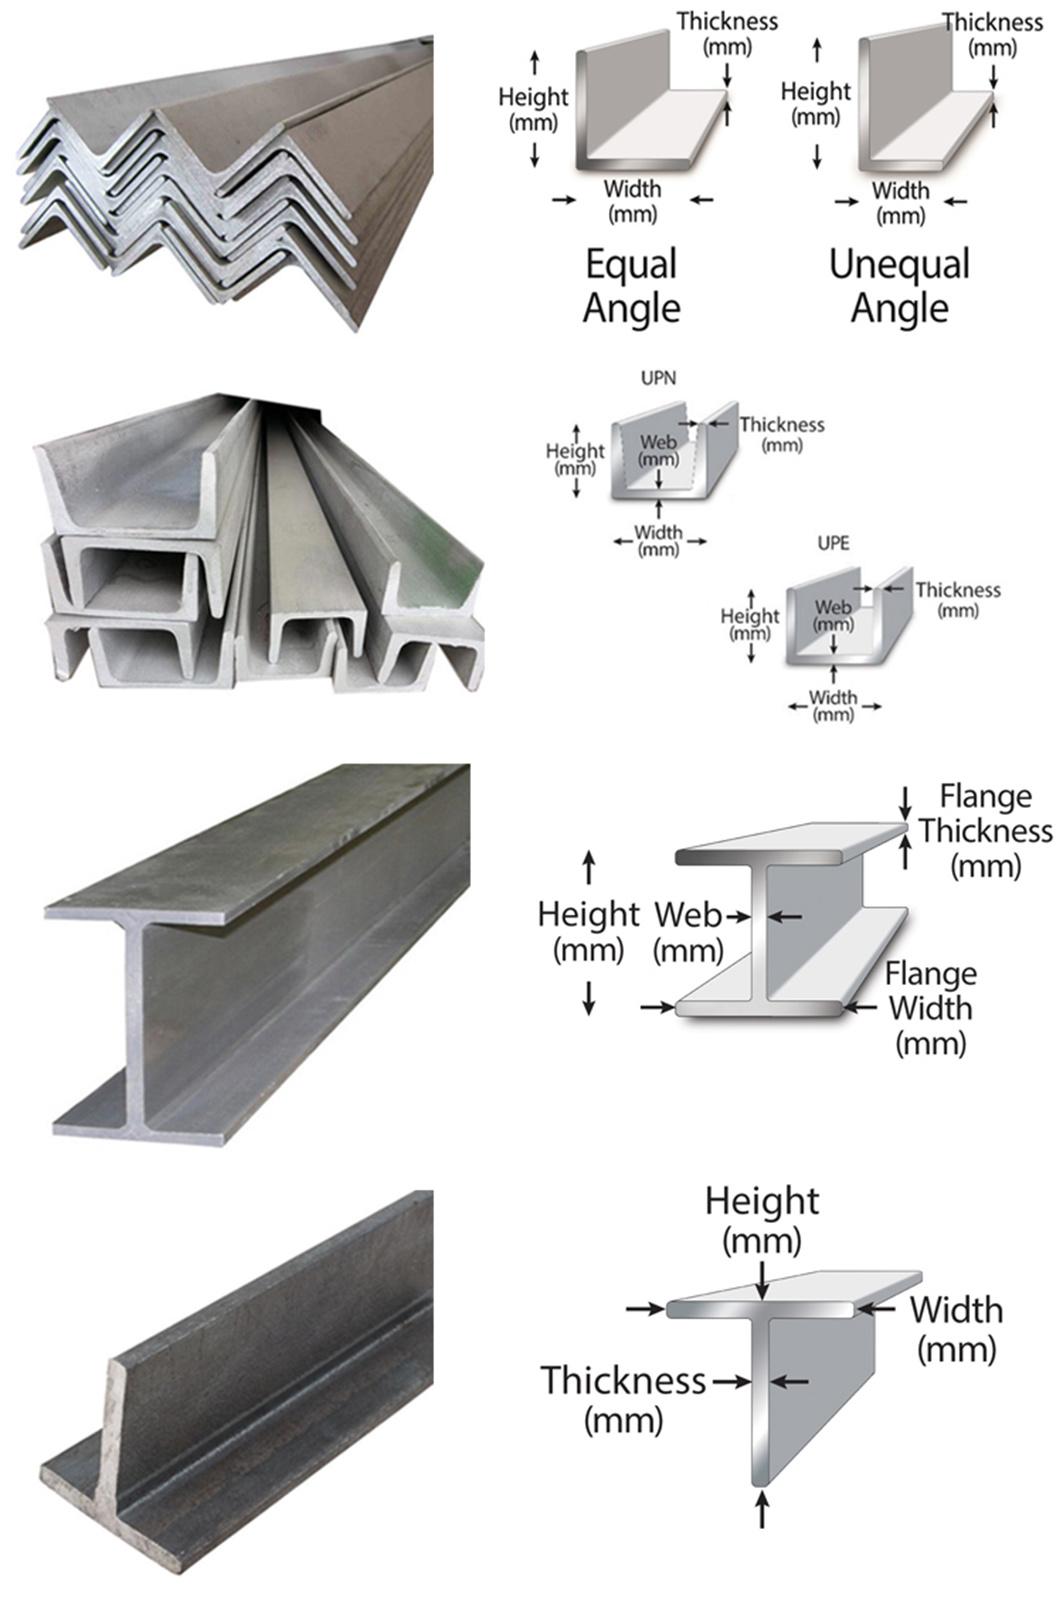 Ss 201 ASTM AISI JIS Cold Rolled Marble Angle Bar